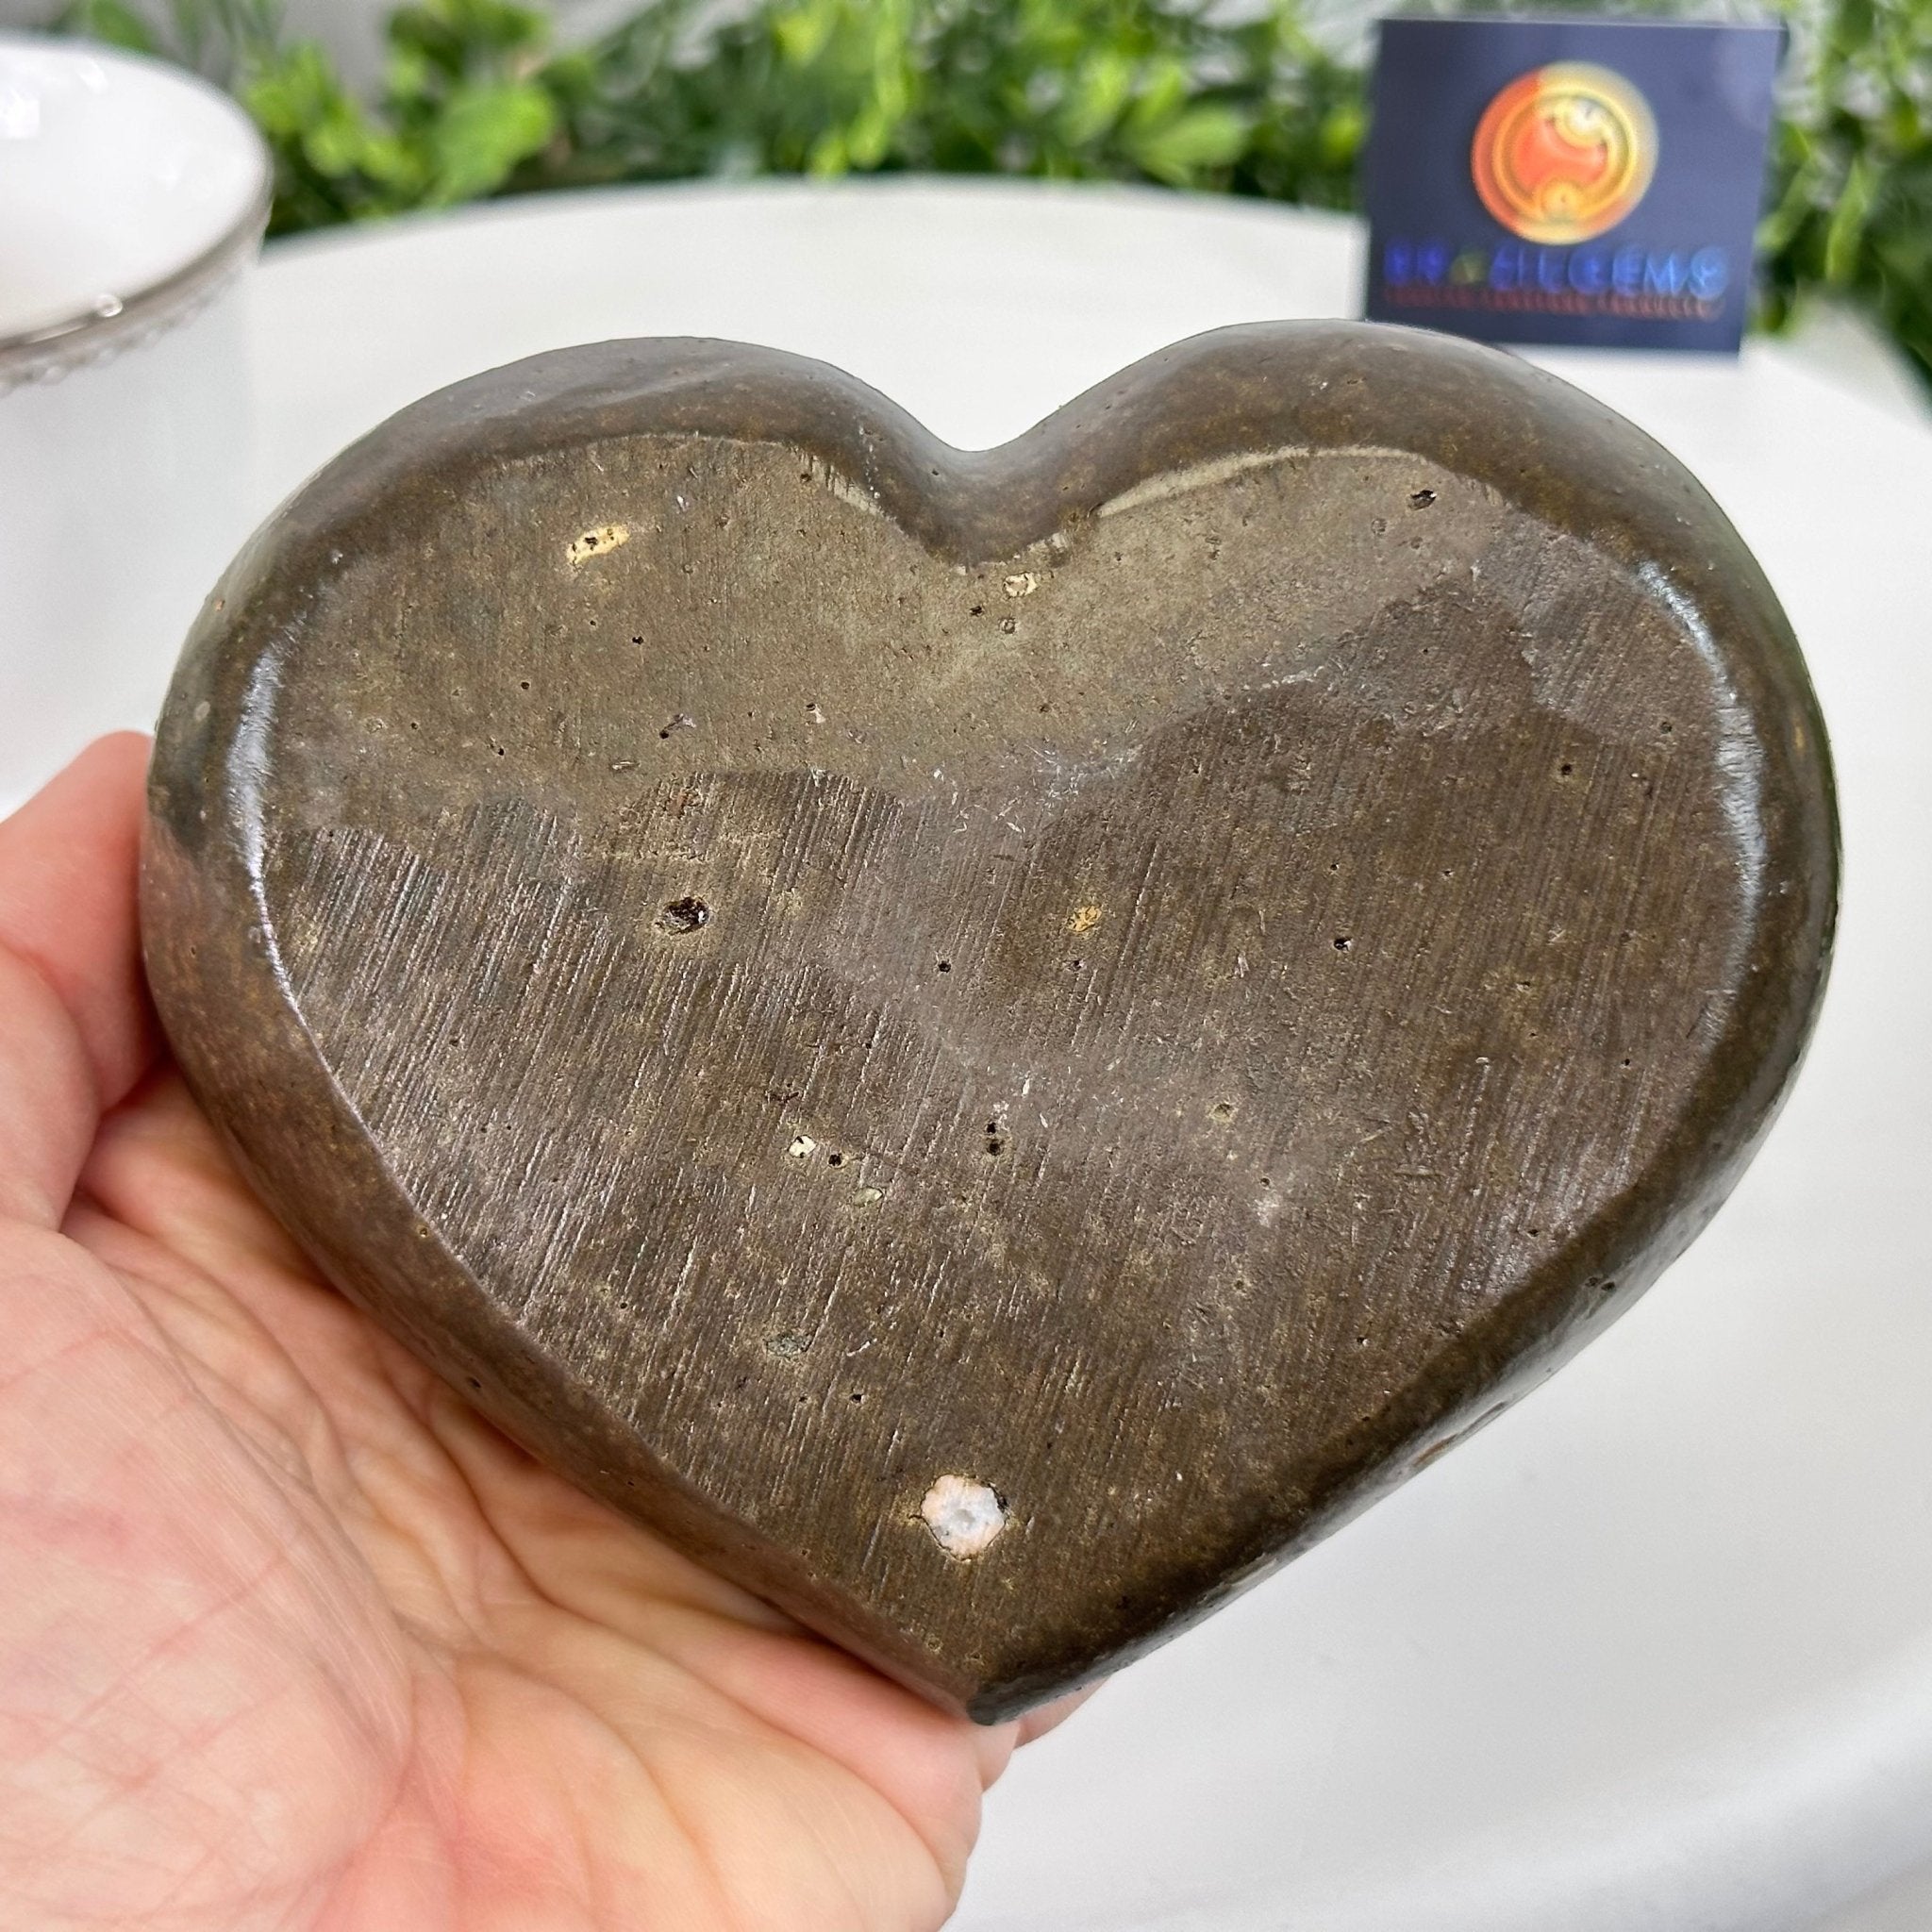 Extra Quality Amethyst Heart Geode on an Acrylic Stand, 1.83 lbs & 3.6" Tall #5462-0065 by Brazil Gems - Brazil GemsBrazil GemsExtra Quality Amethyst Heart Geode on an Acrylic Stand, 1.83 lbs & 3.6" Tall #5462-0065 by Brazil GemsHearts5462-0065